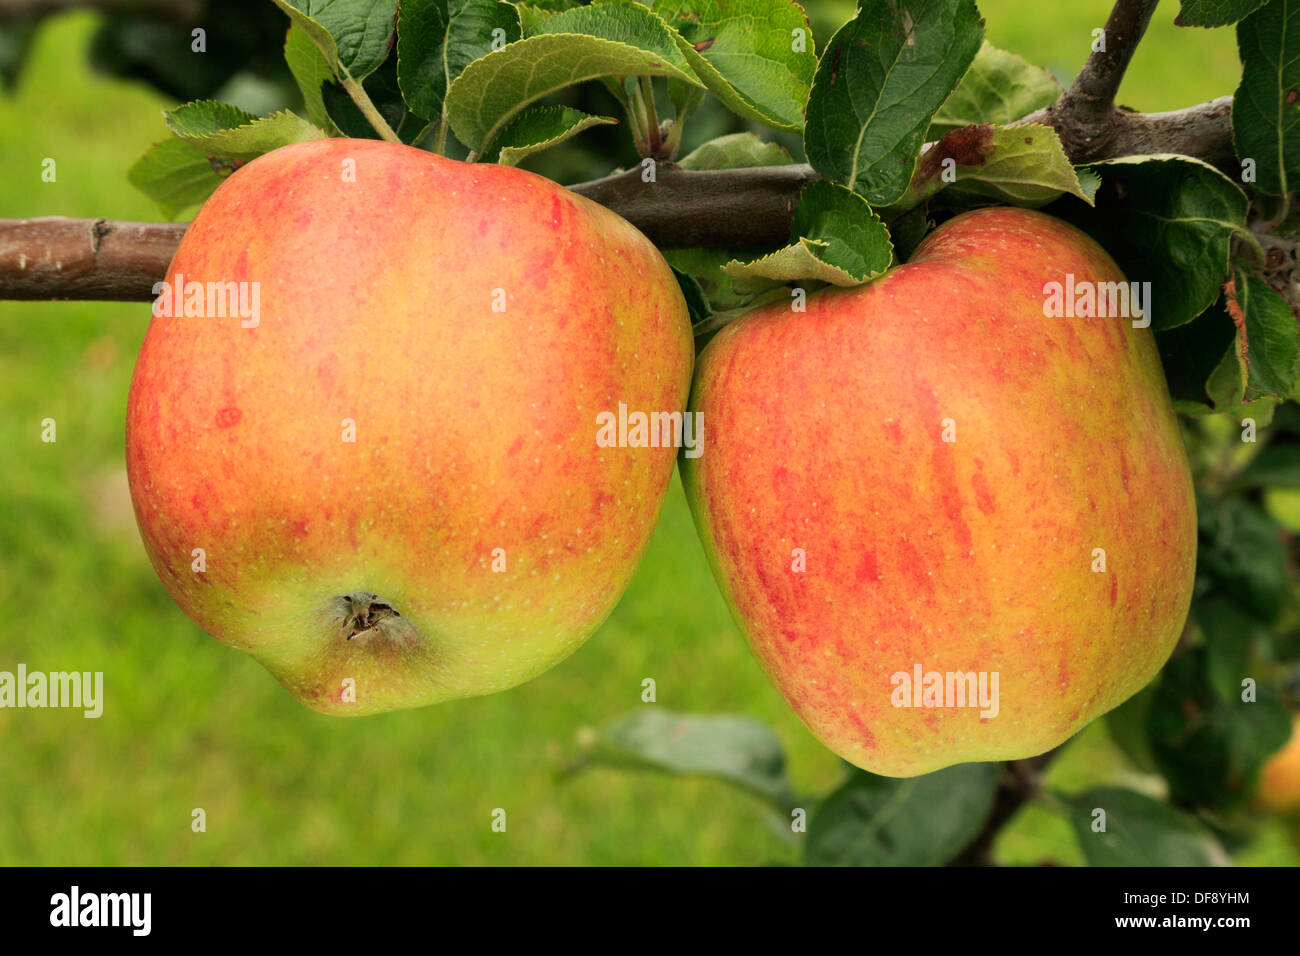 Apple 'Peasegood's Nonsuch', culinary, cooking apple,  variety growing on tree, fruit apples England UK Stock Photo